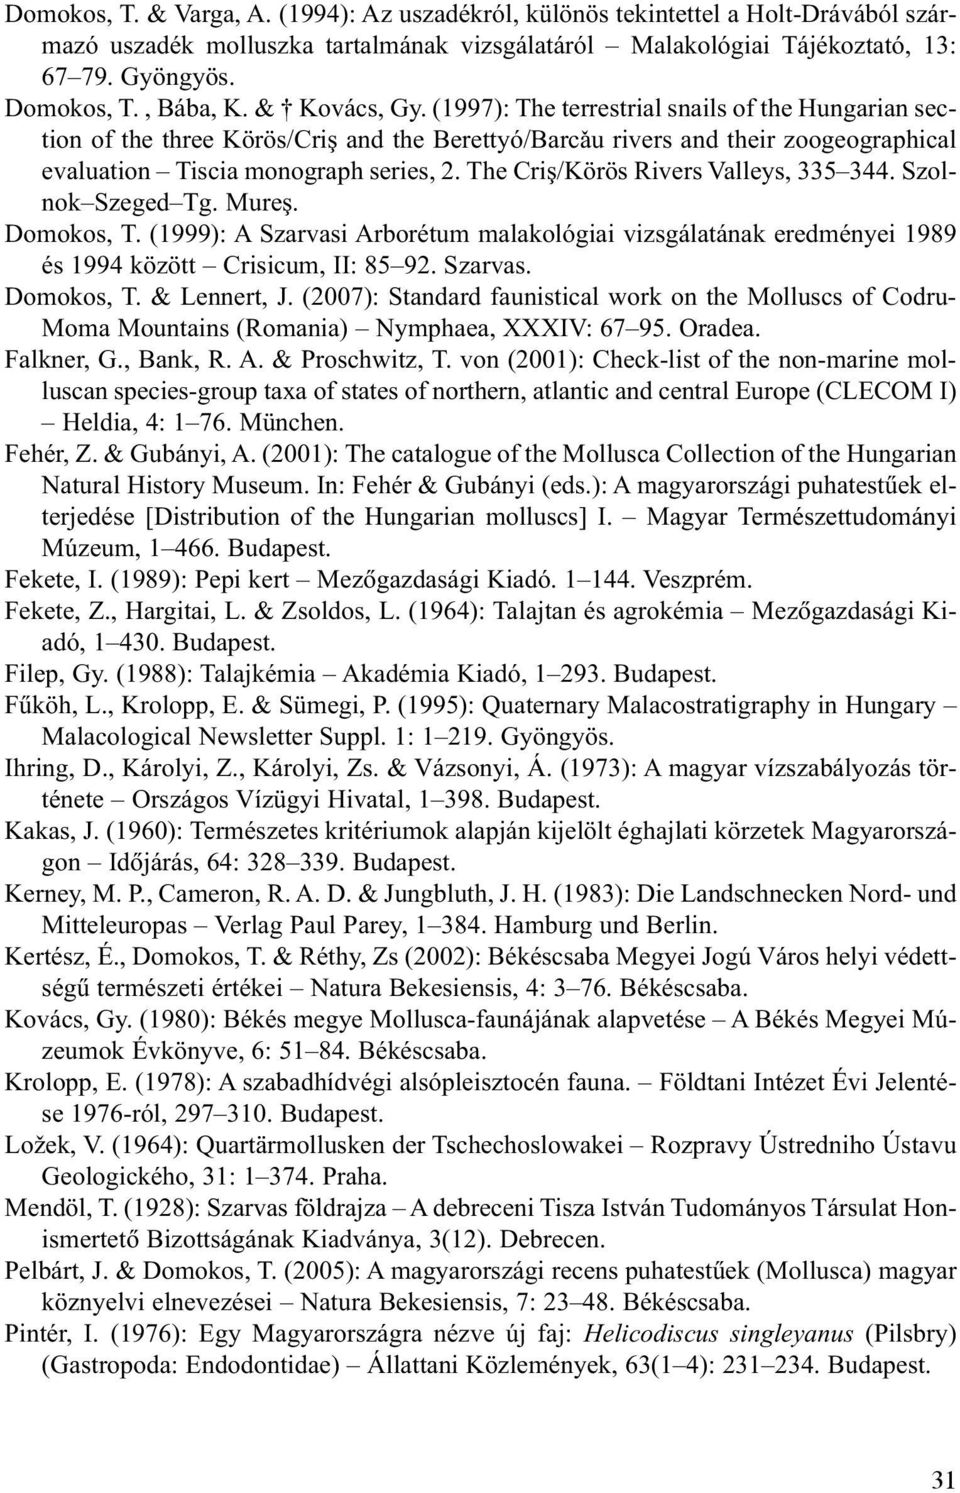 (1997): The terrestrial snails of the Hungarian section of the three Körös/Criş and the Berettyó/Barca4u rivers and their zoogeographical evaluation Tiscia monograph series, 2.